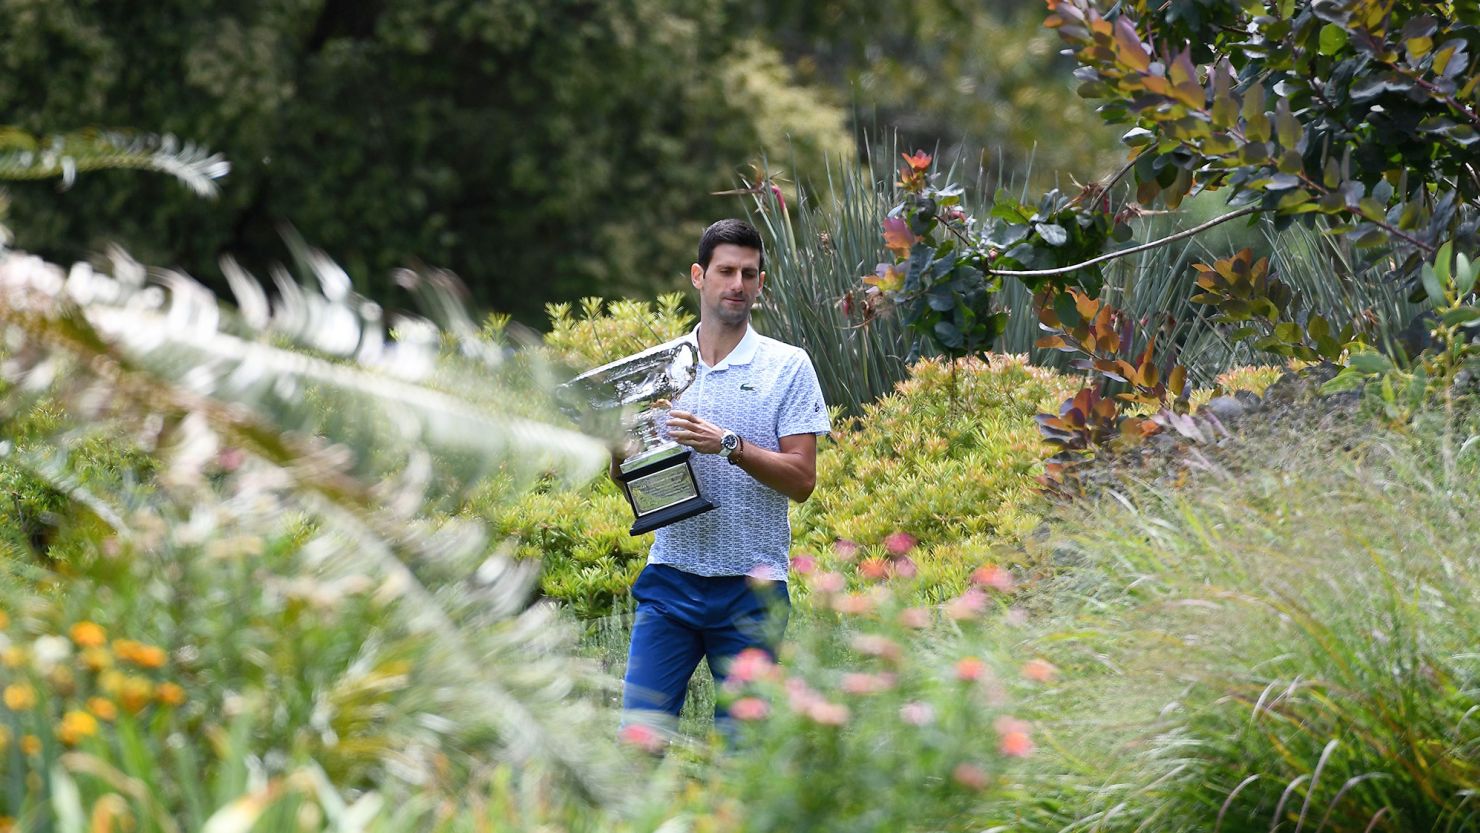 Serbia's Novak Djokovic walks in the Royal Botanical Gardens with the Norman Brookes Challenge Cup trophy during a photo shoot in Melbourne on February 3, 2020, a day after his victory against Austria's Dominic Thiem in the men's singles final of the Australian Open tennis tournament. (Photo by William WEST / AFP) / IMAGE RESTRICTED TO EDITORIAL USE - STRICTLY NO COMMERCIAL USE (Photo by WILLIAM WEST/AFP via Getty Images)